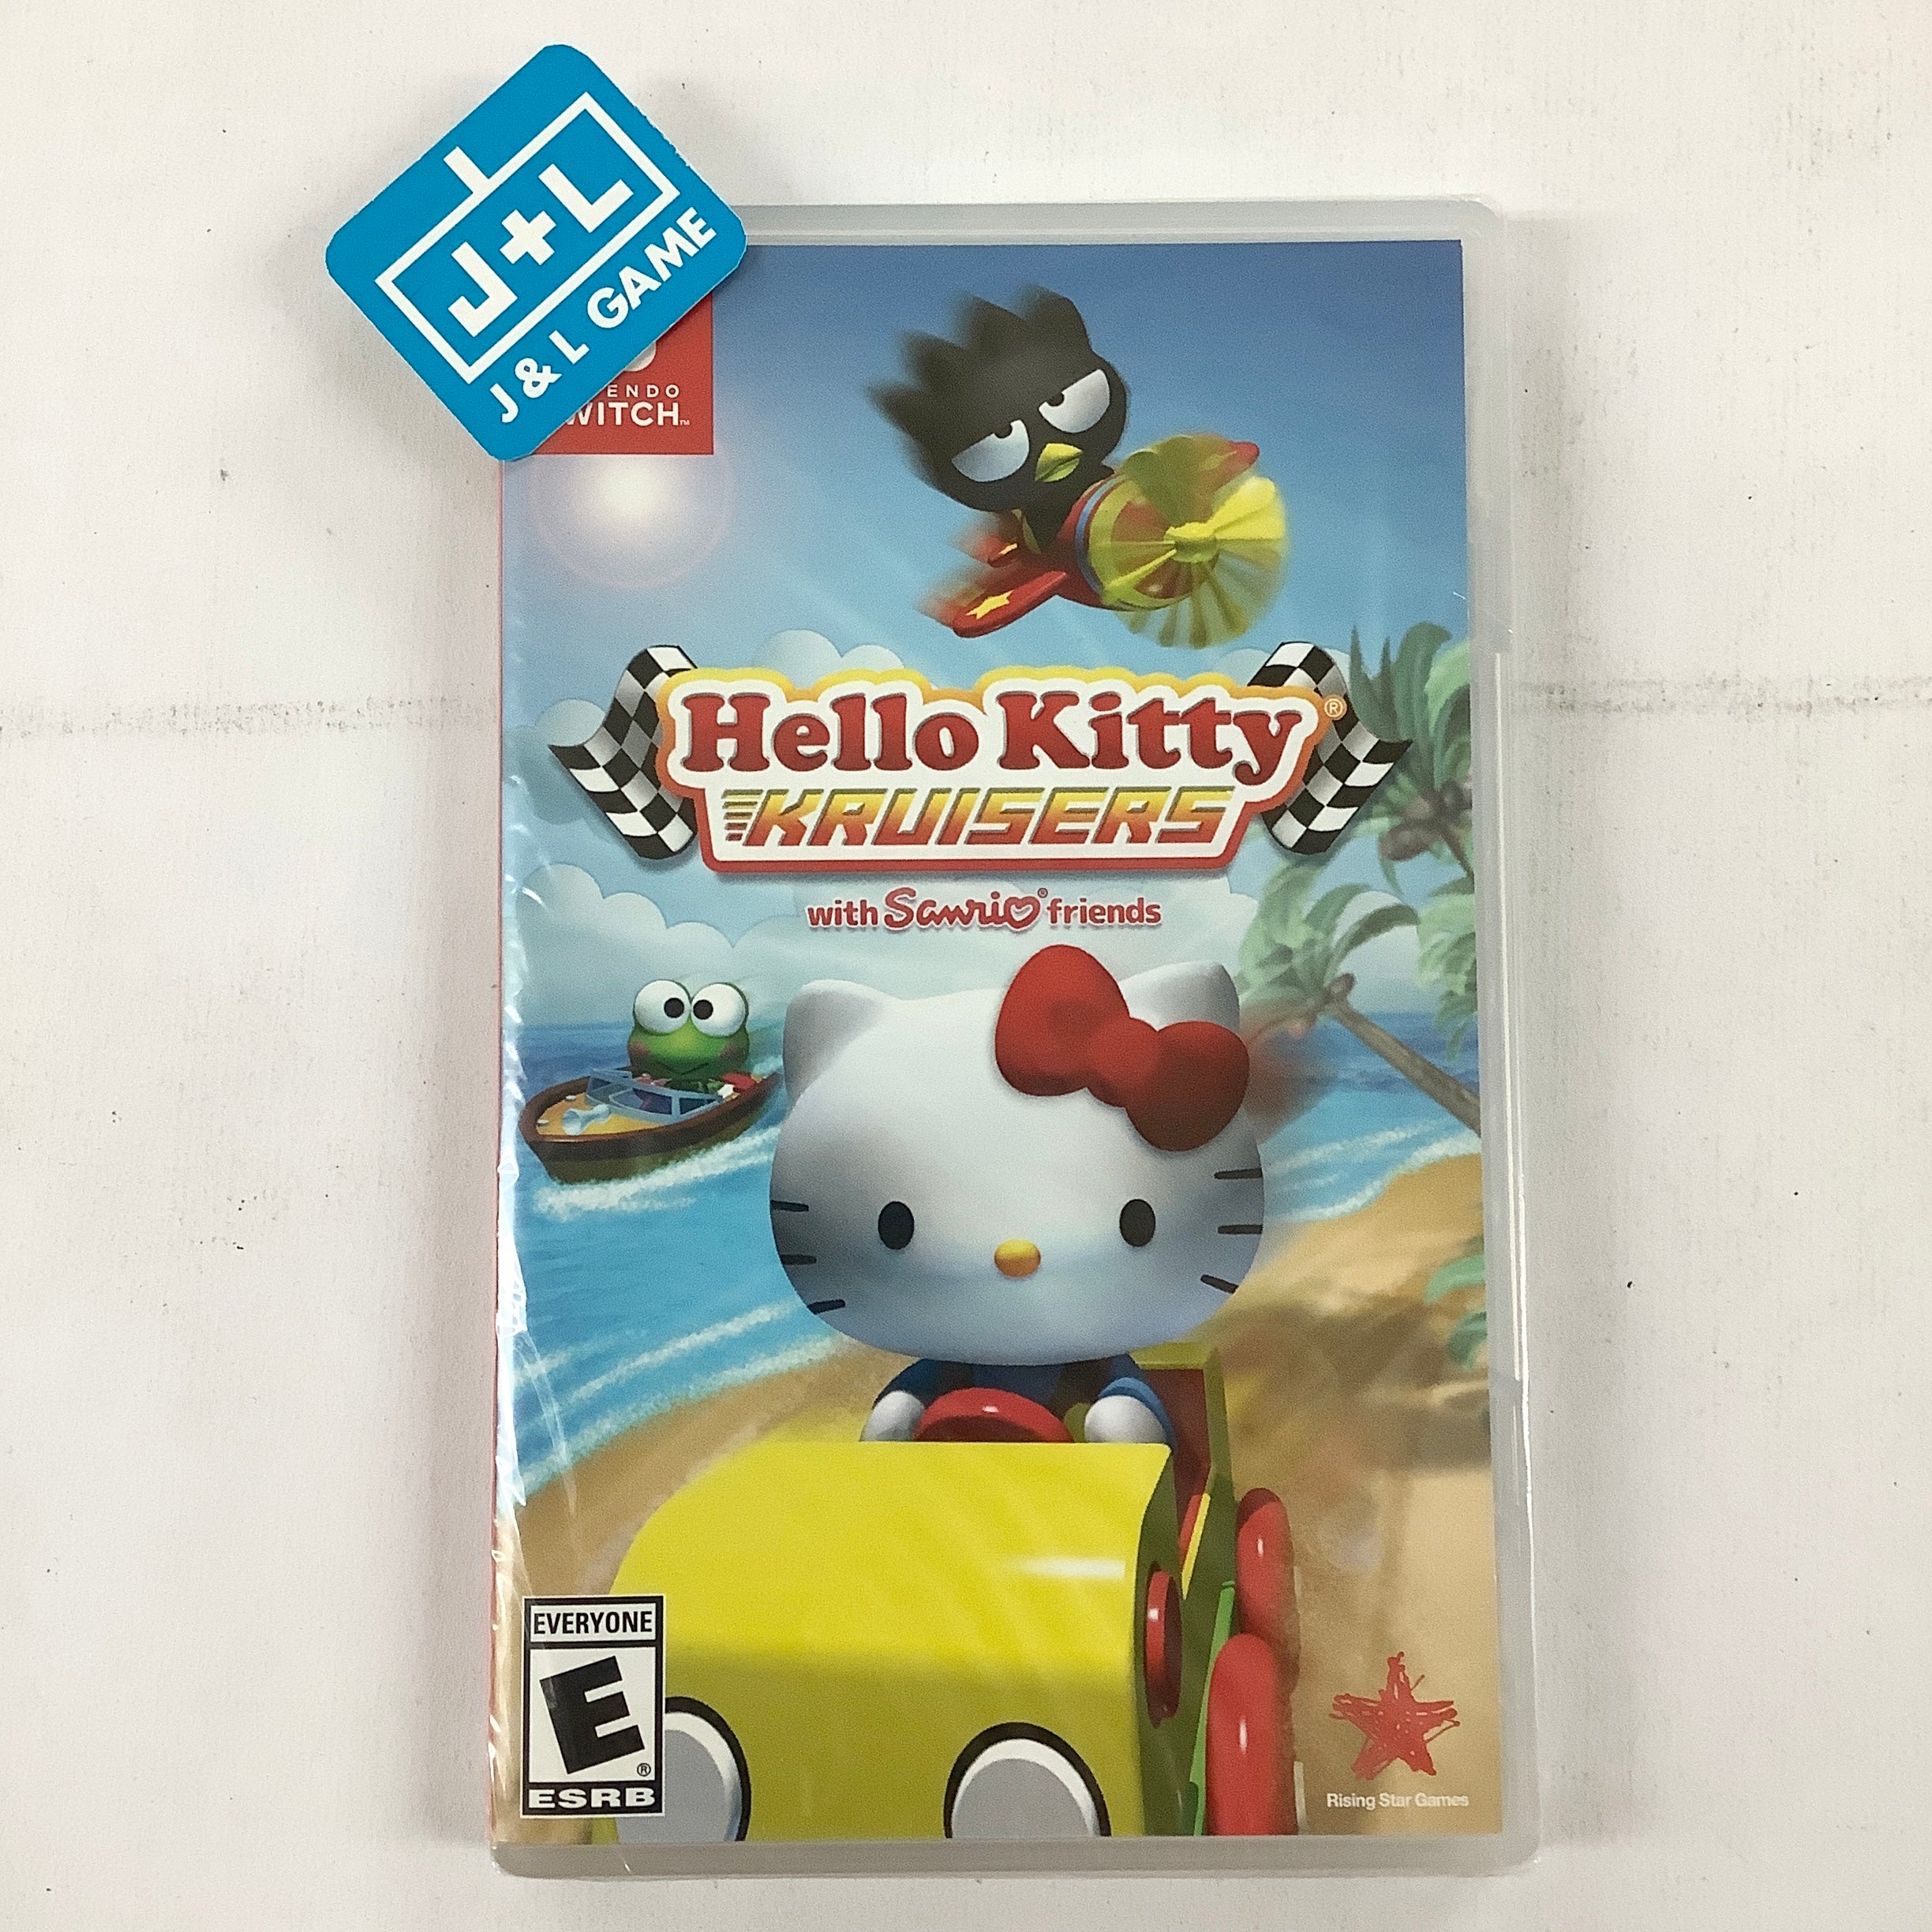 Hello Kitty Kruisers with Sanrio Friends - (NSW) Nintendo Switch Video Games Rising Star Games   